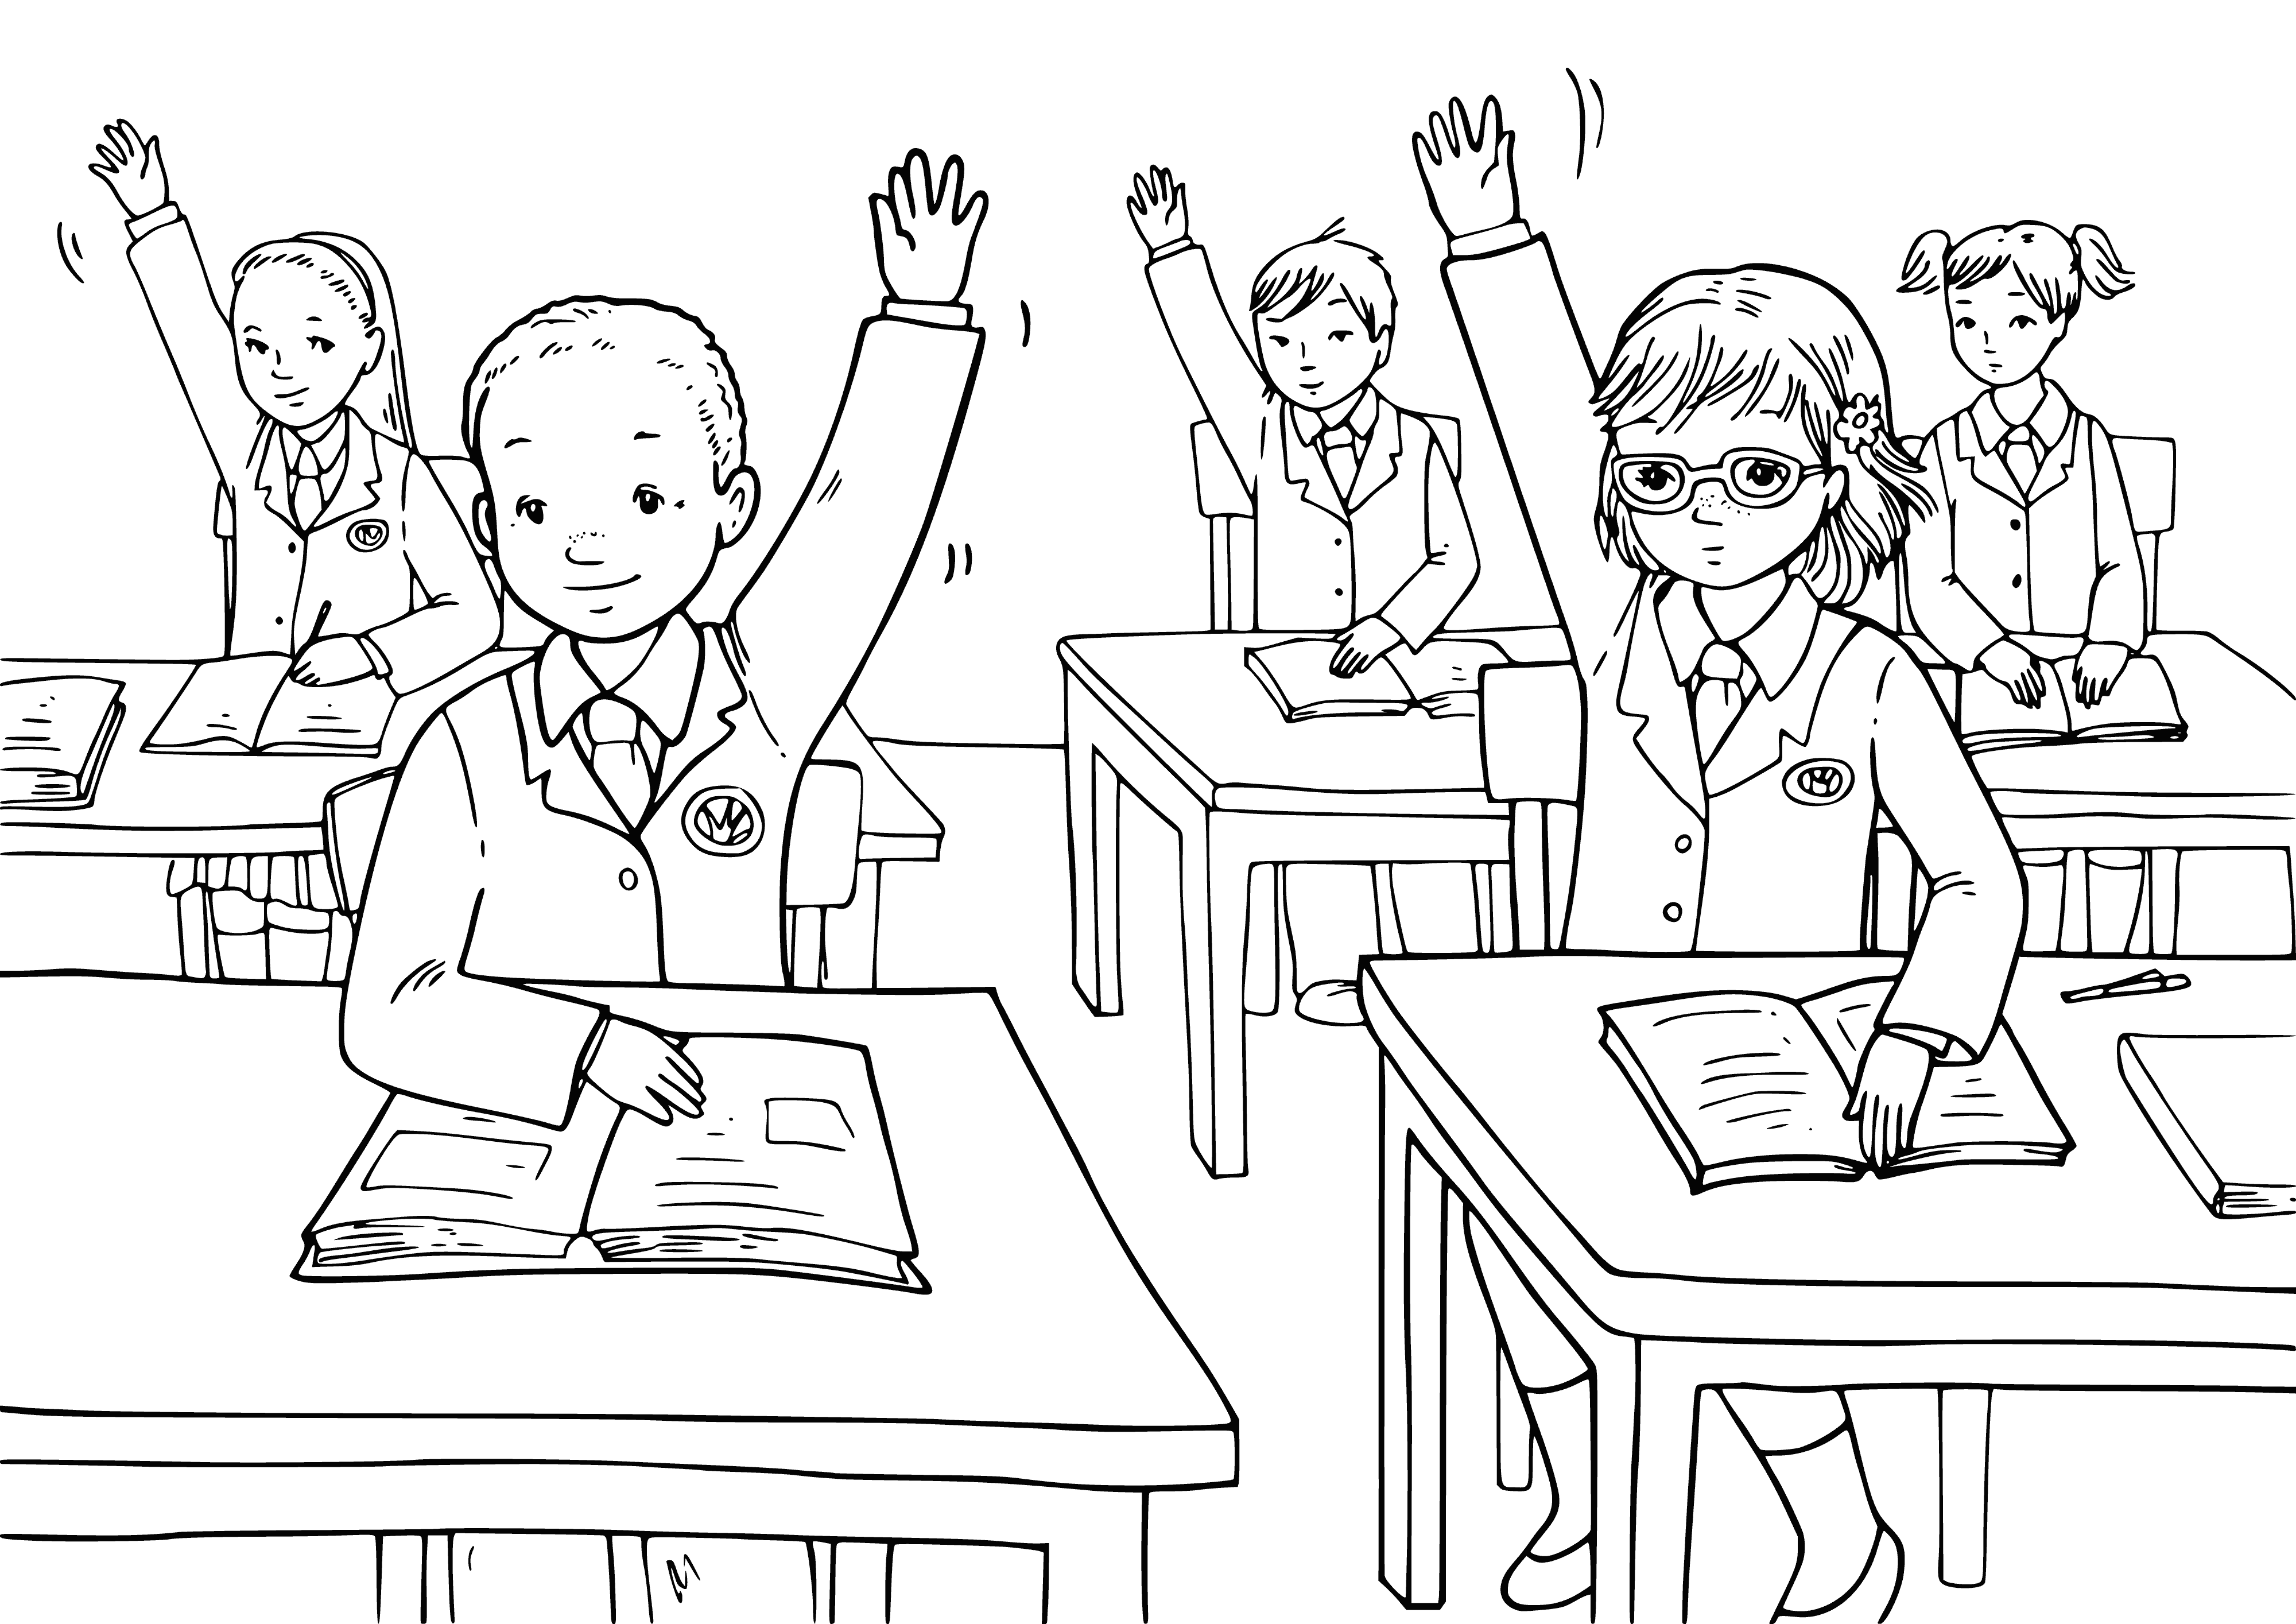 coloring page: Schoolchildren in uniforms are at desks for a lesson about the world on "The Day of Knowledge." Teacher stands at board with pointer.